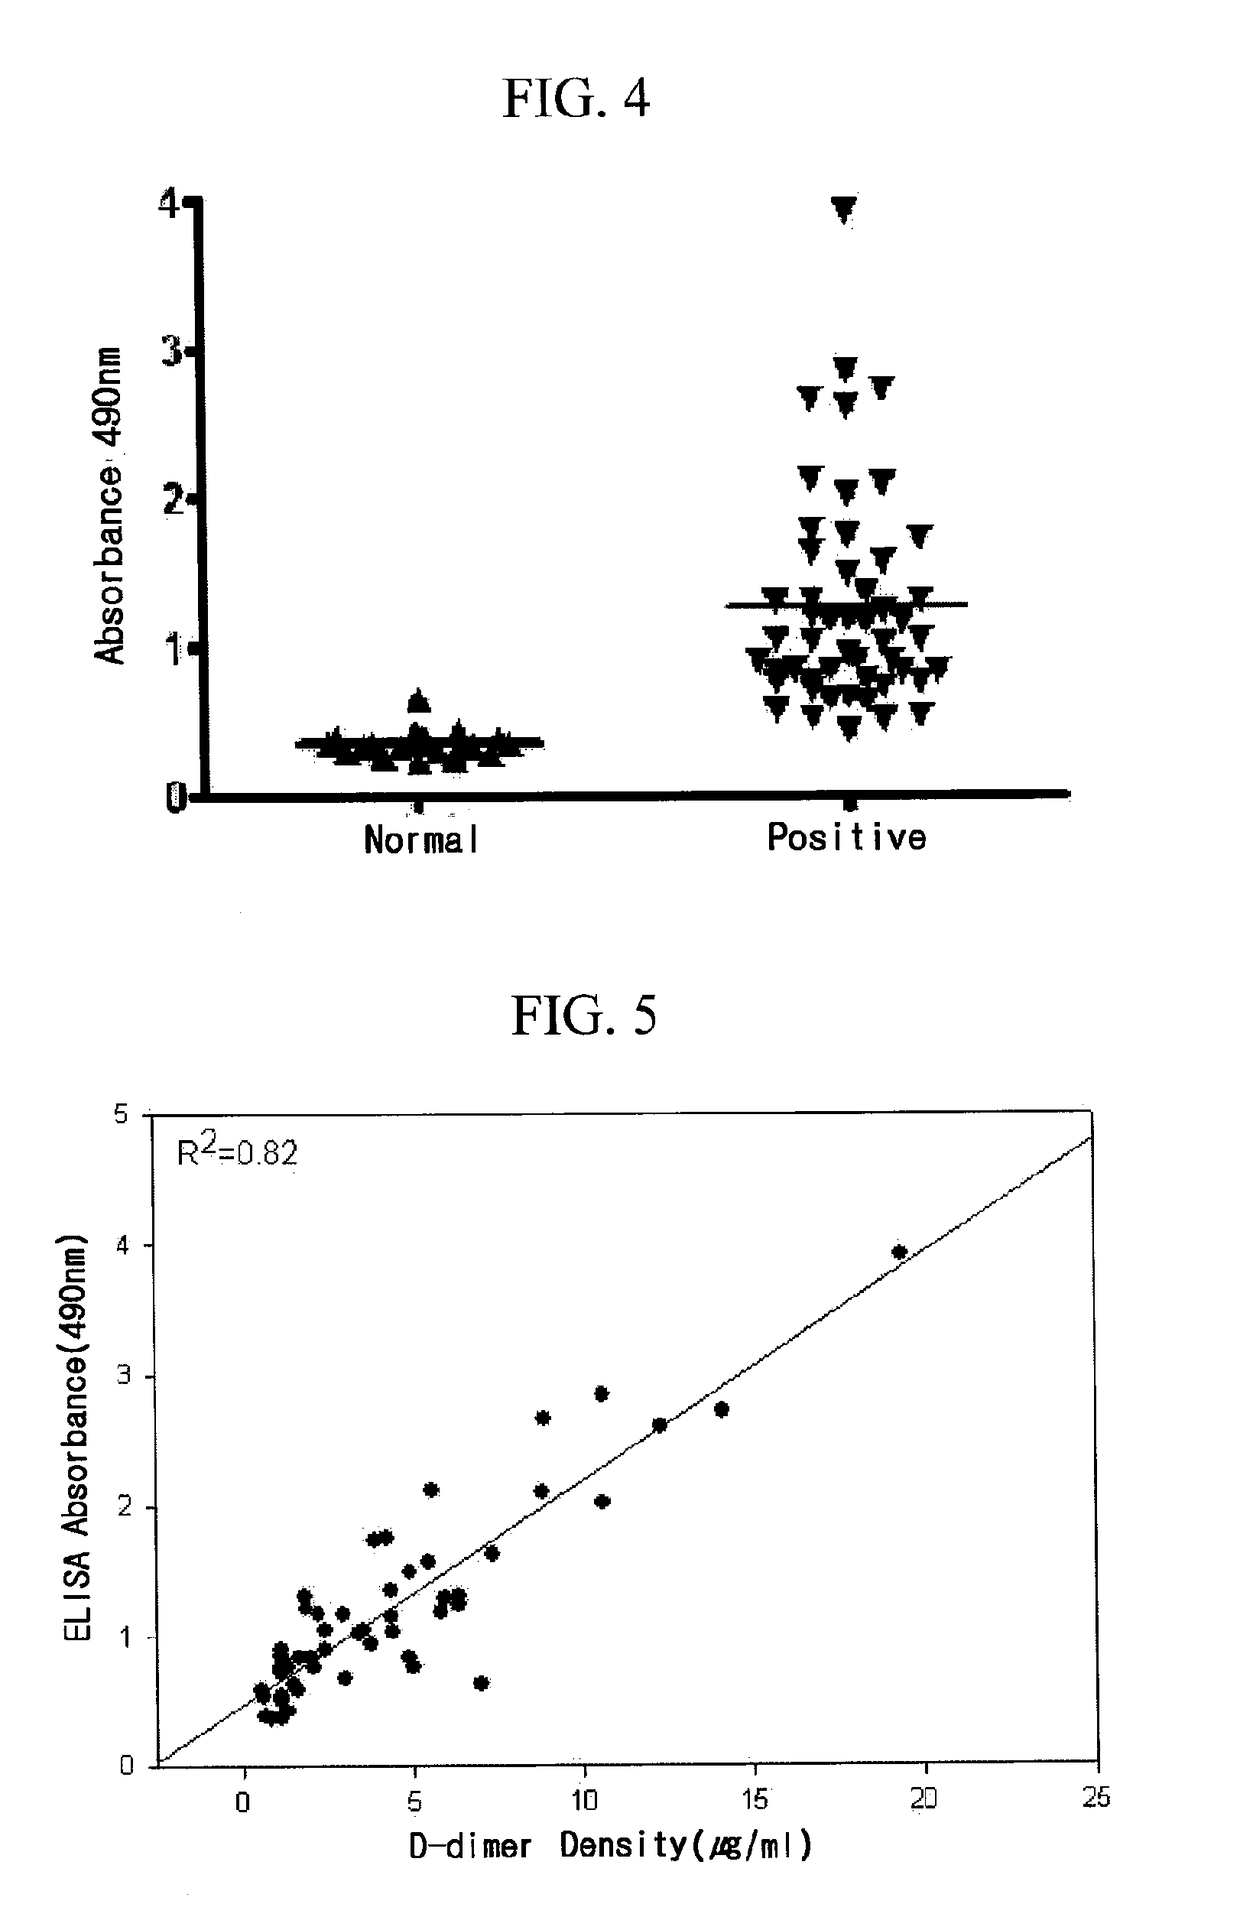 Monoclonal antibody against d-dimer and diagnosis agent for detecting d-dimer, crosslinked fibrin and its derivatives containing d-dimer by using the antibody